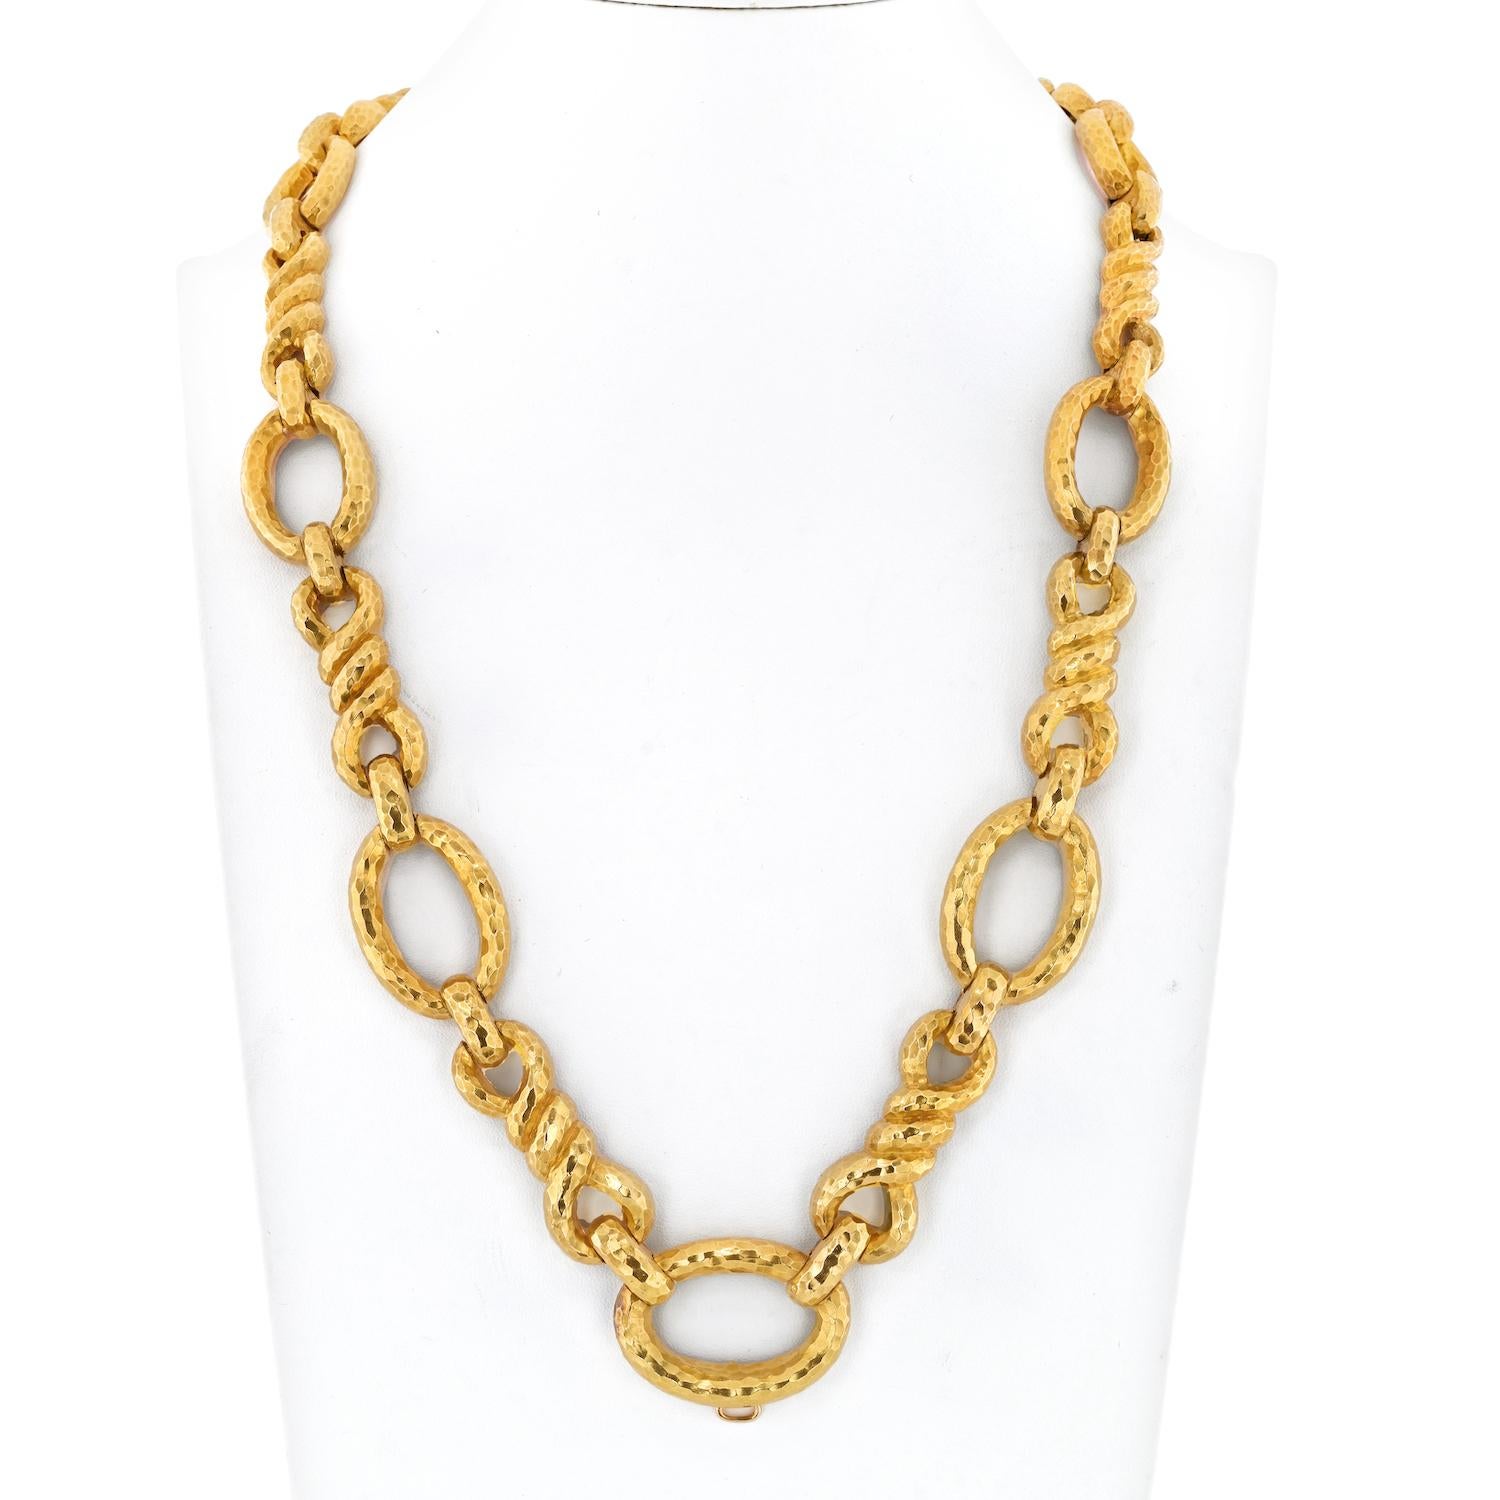 Introducing the striking David Webb Platinum & 18K Yellow Gold Open Link Hammered Necklace, a true testament to the brand's exceptional craftsmanship and innovative design. This necklace exudes timeless elegance and versatility, offering a stunning